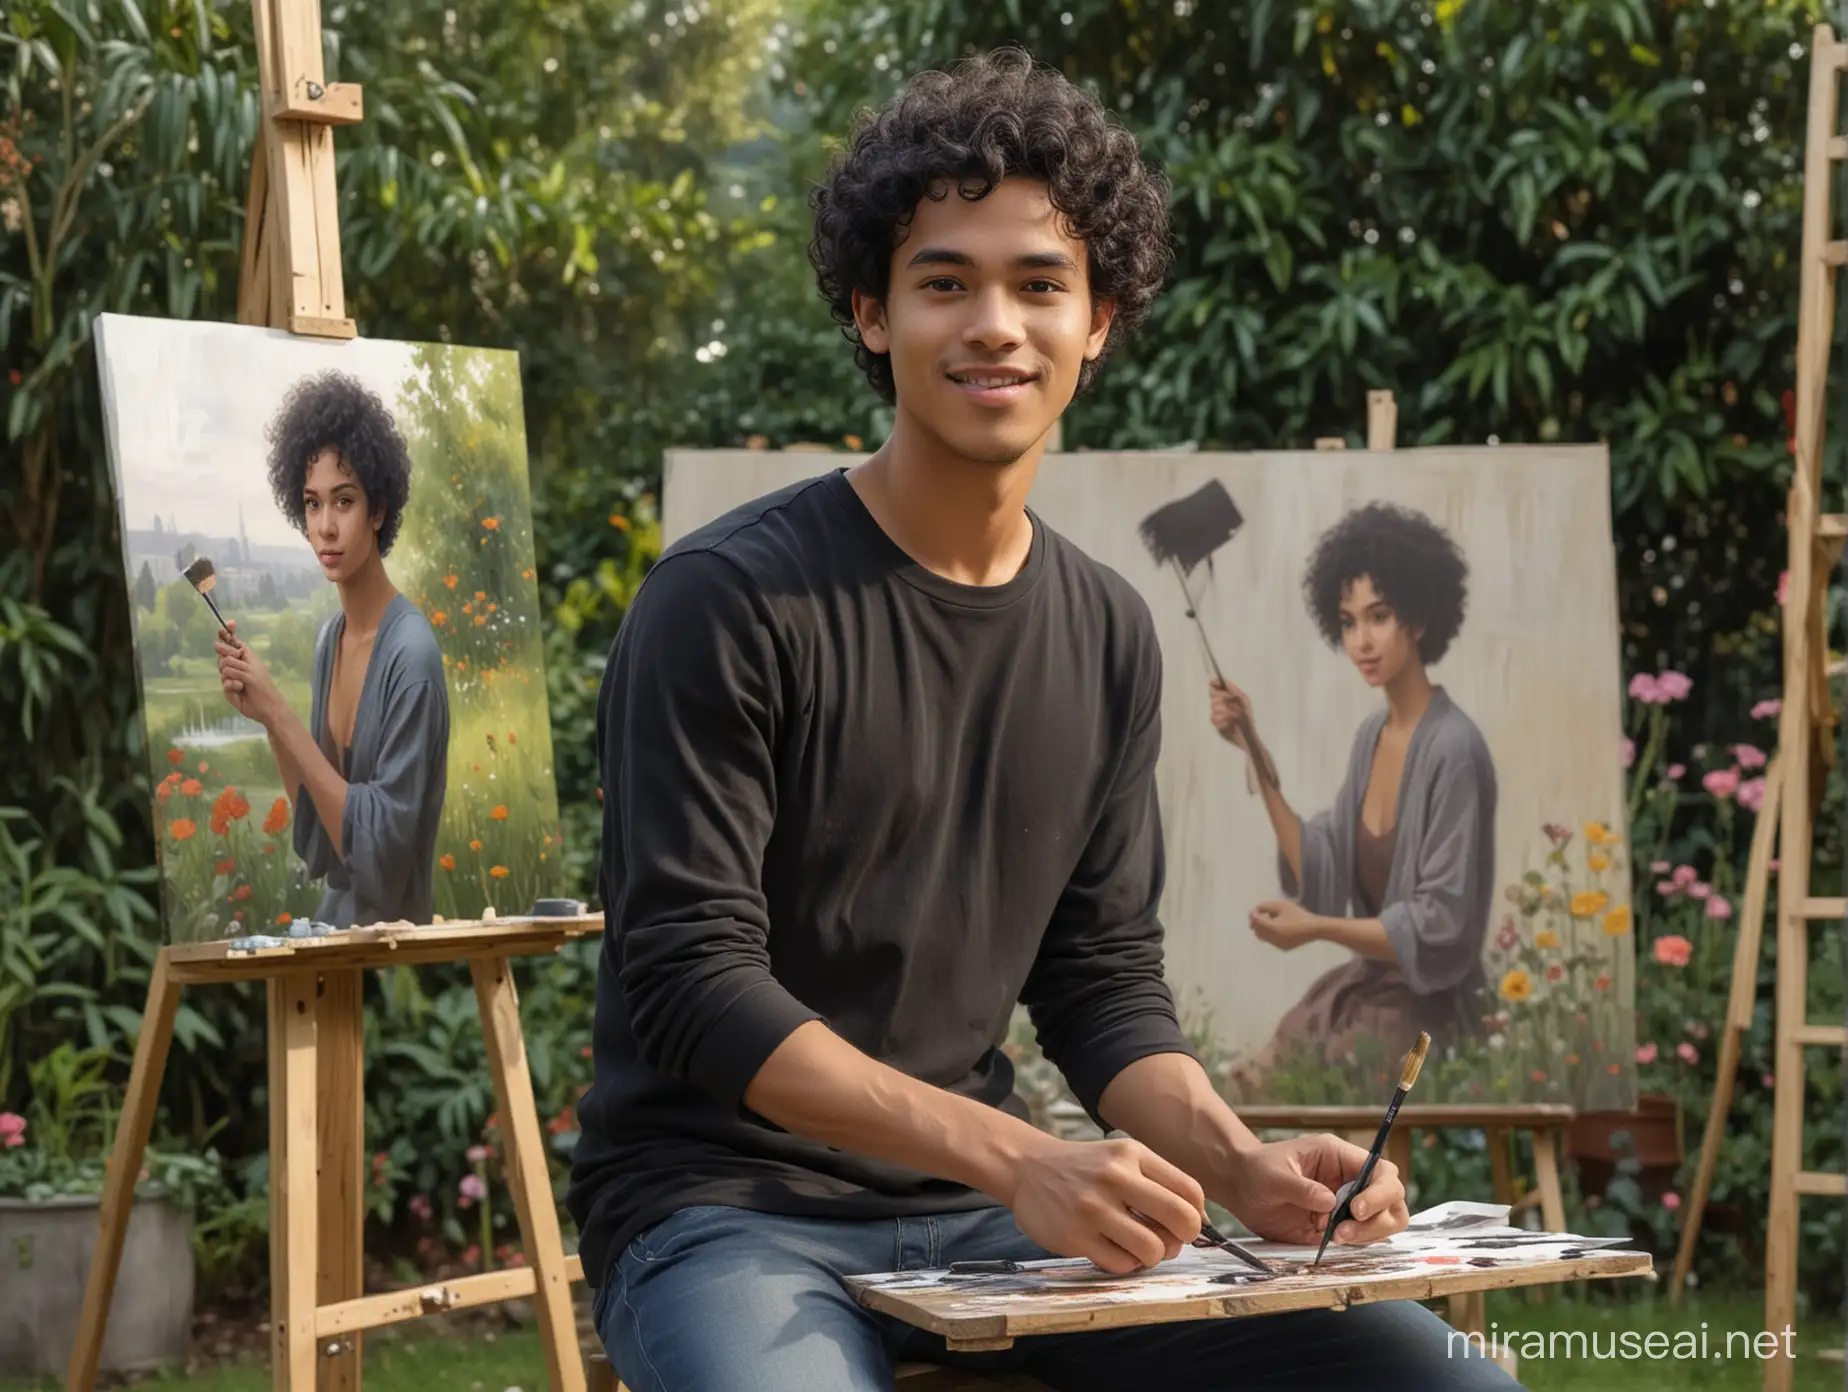 Young Indonesian Artist Painting Portrait in Lush Garden Setting